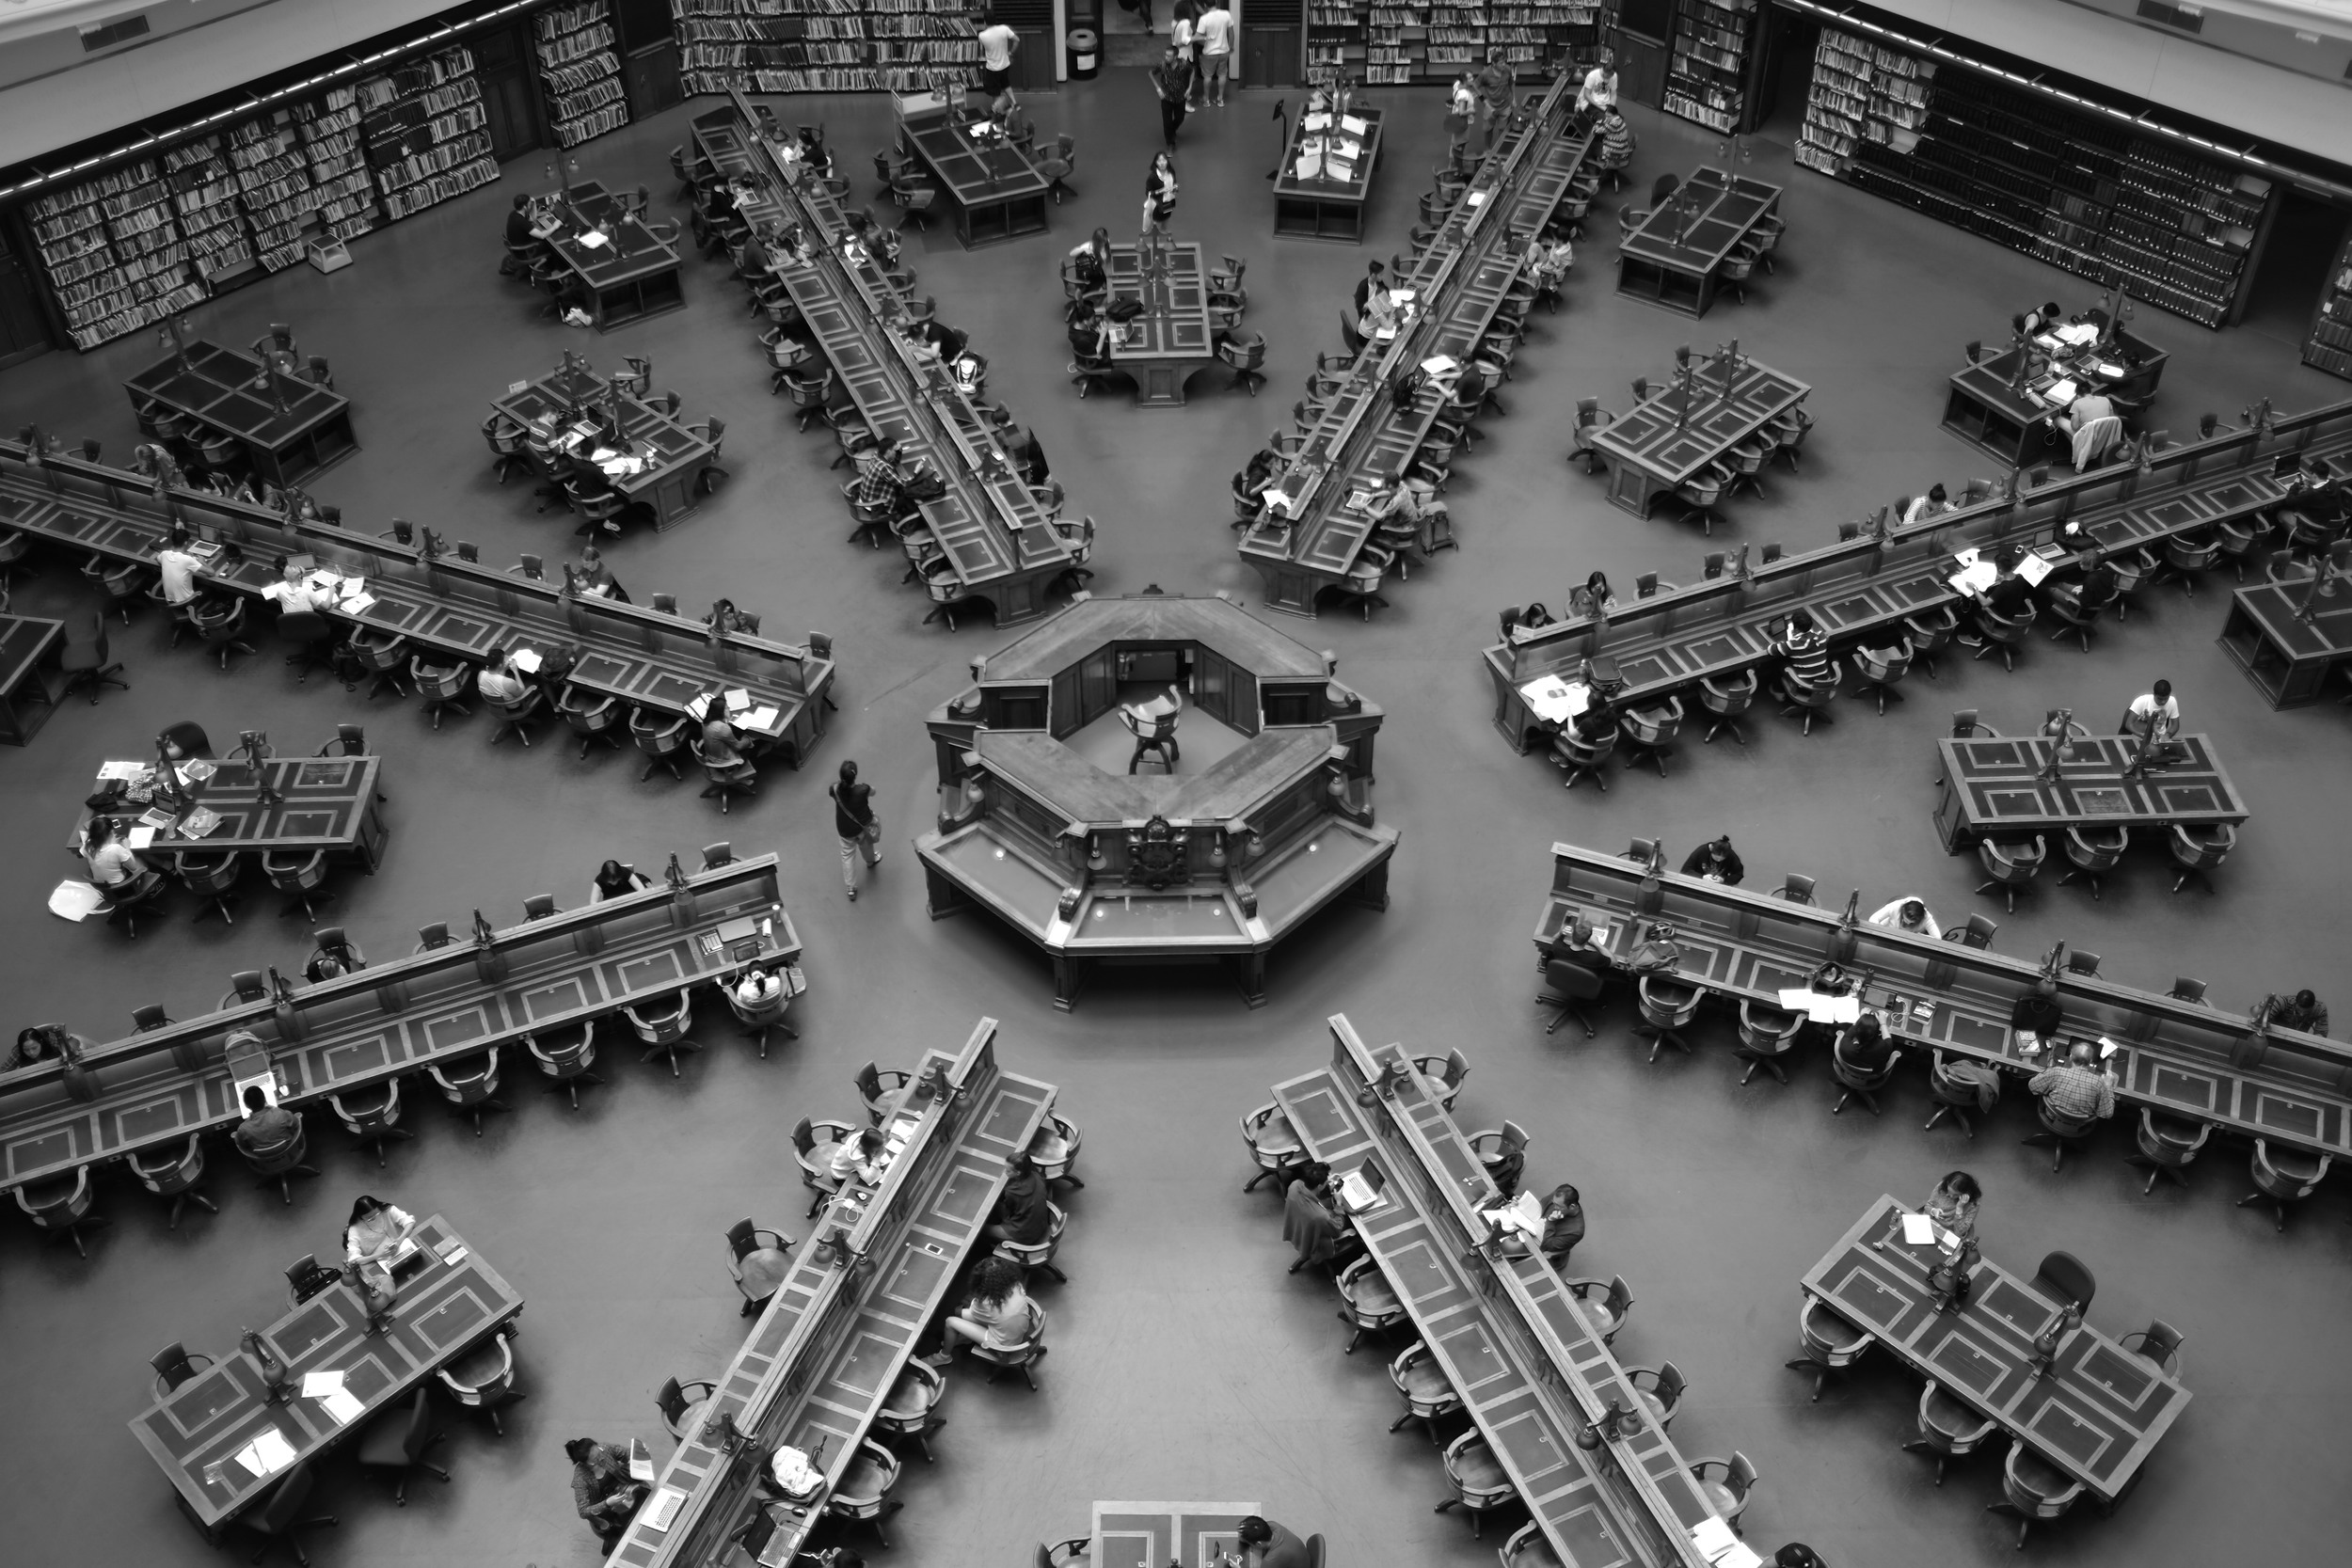  Reading Room, State Library of Victoria, Melbourne. 